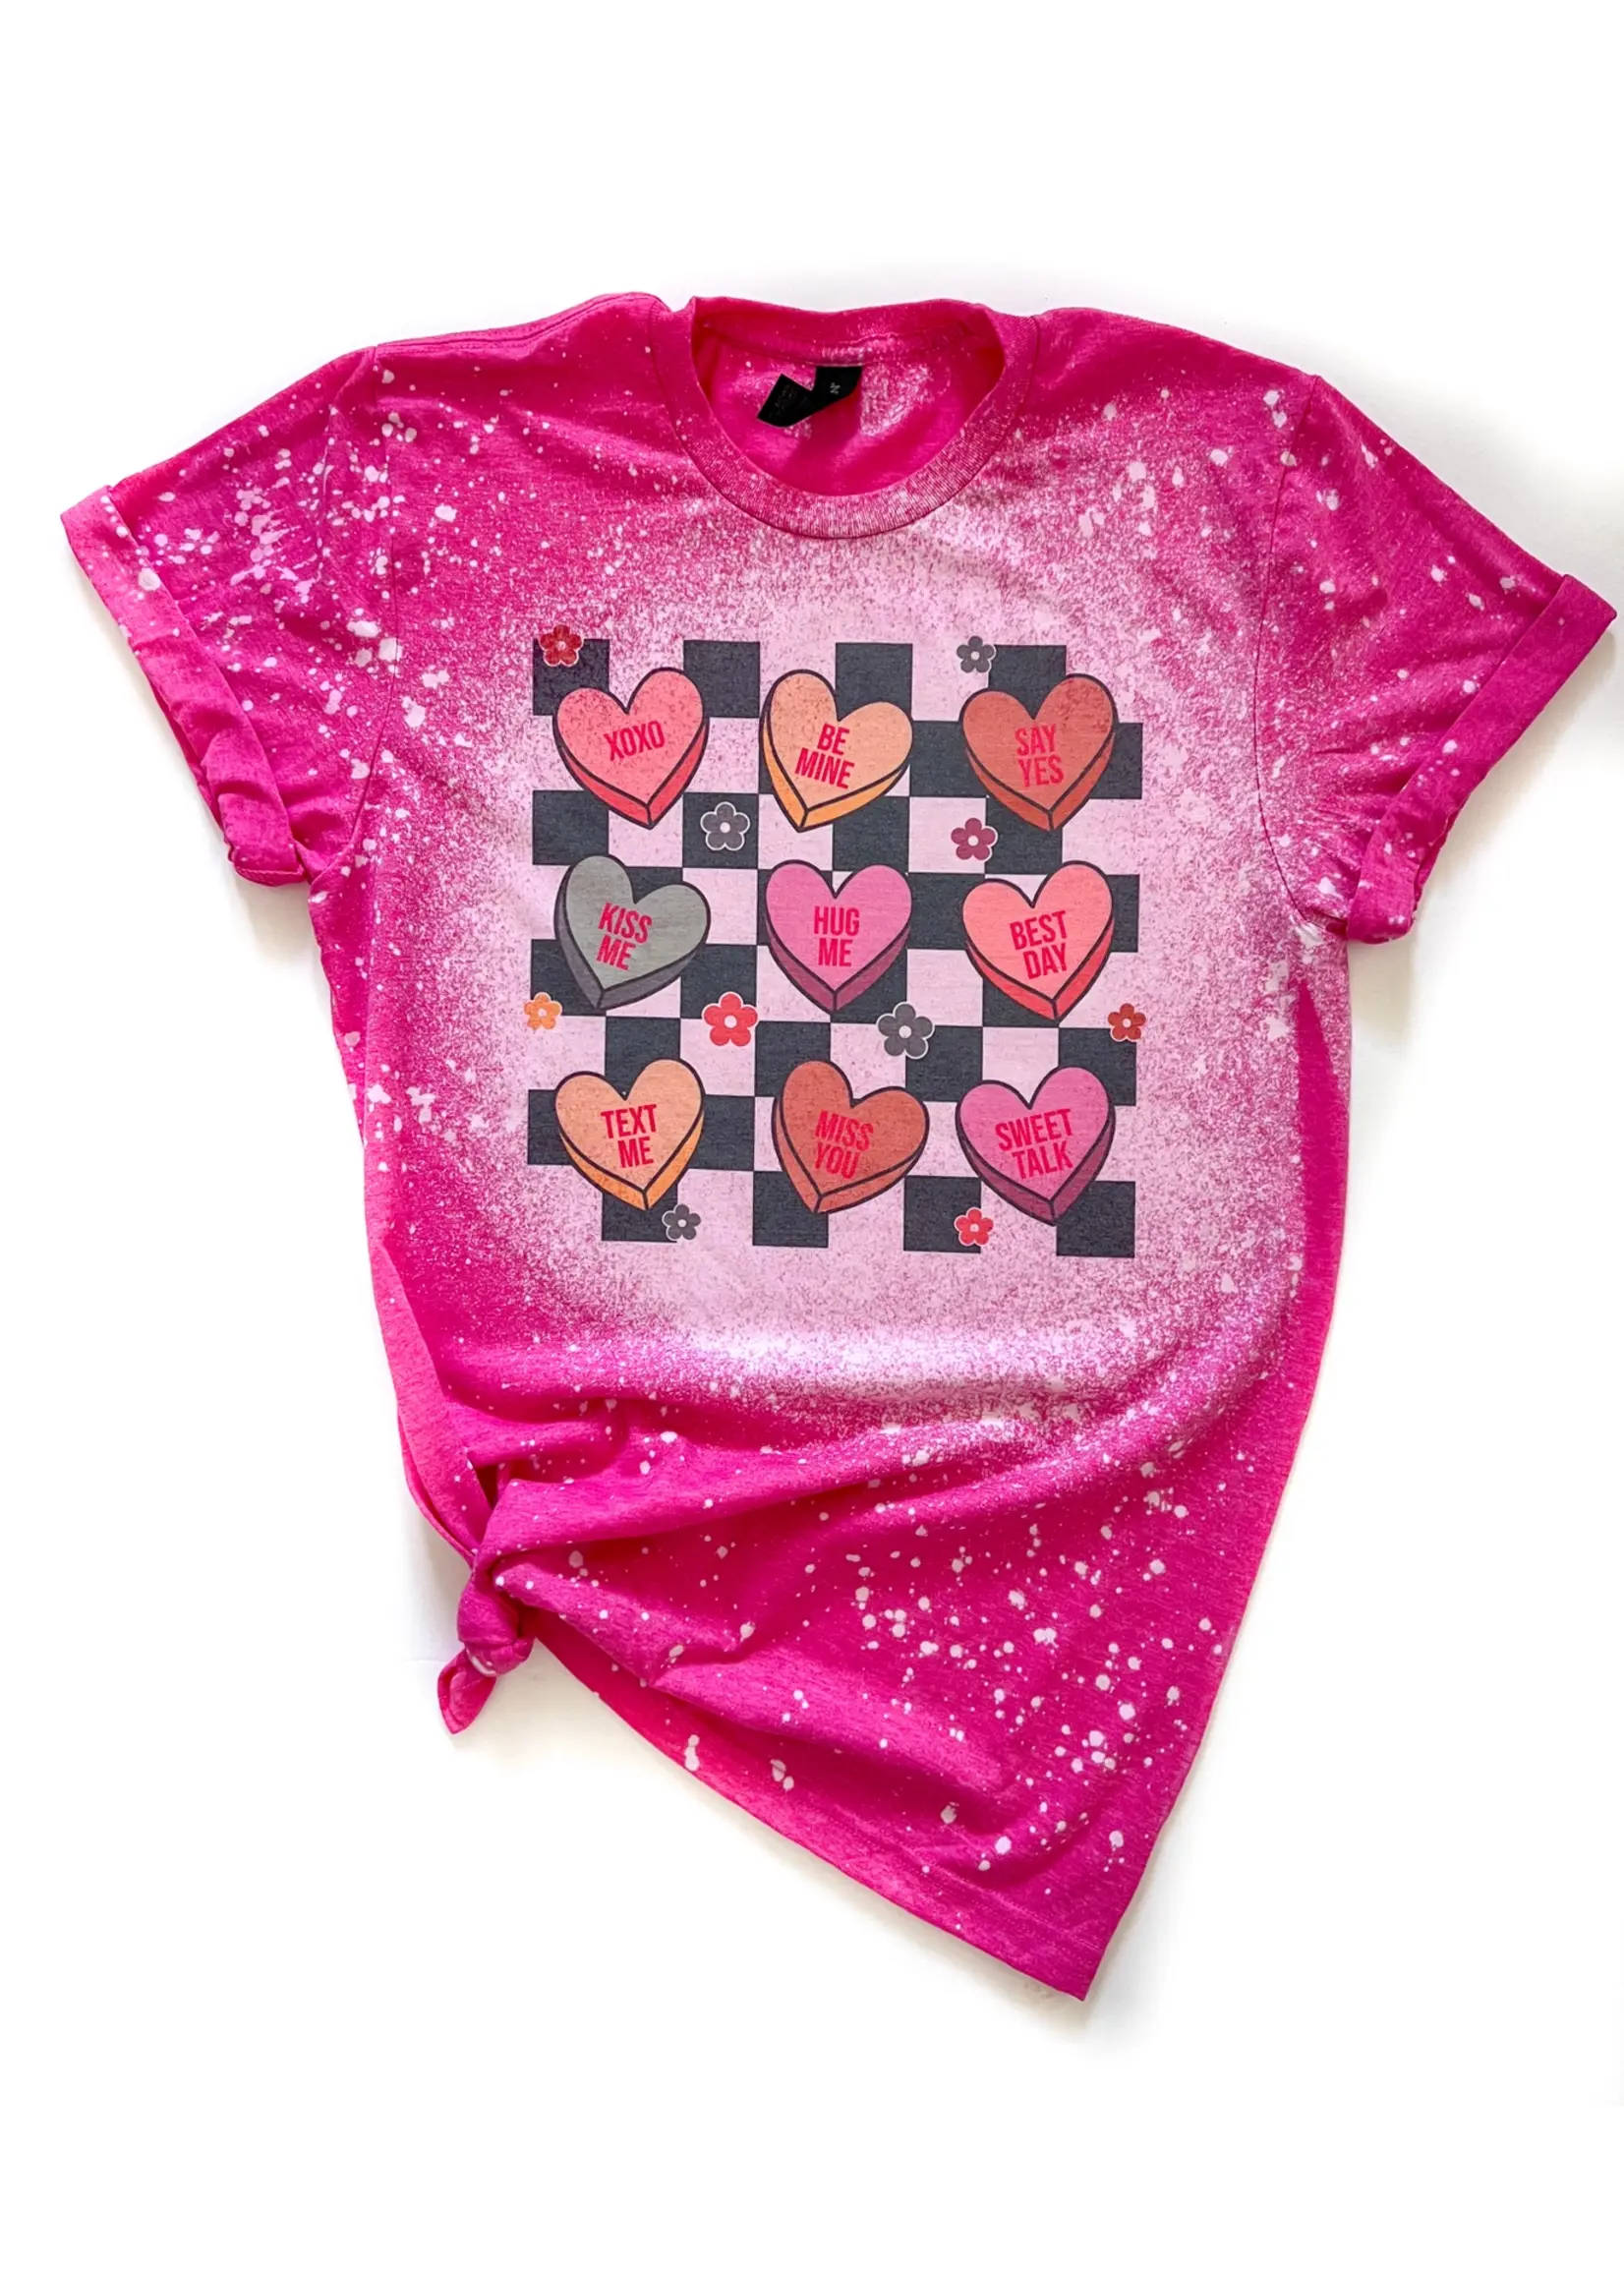 Conversation Hearts Bleached Tee